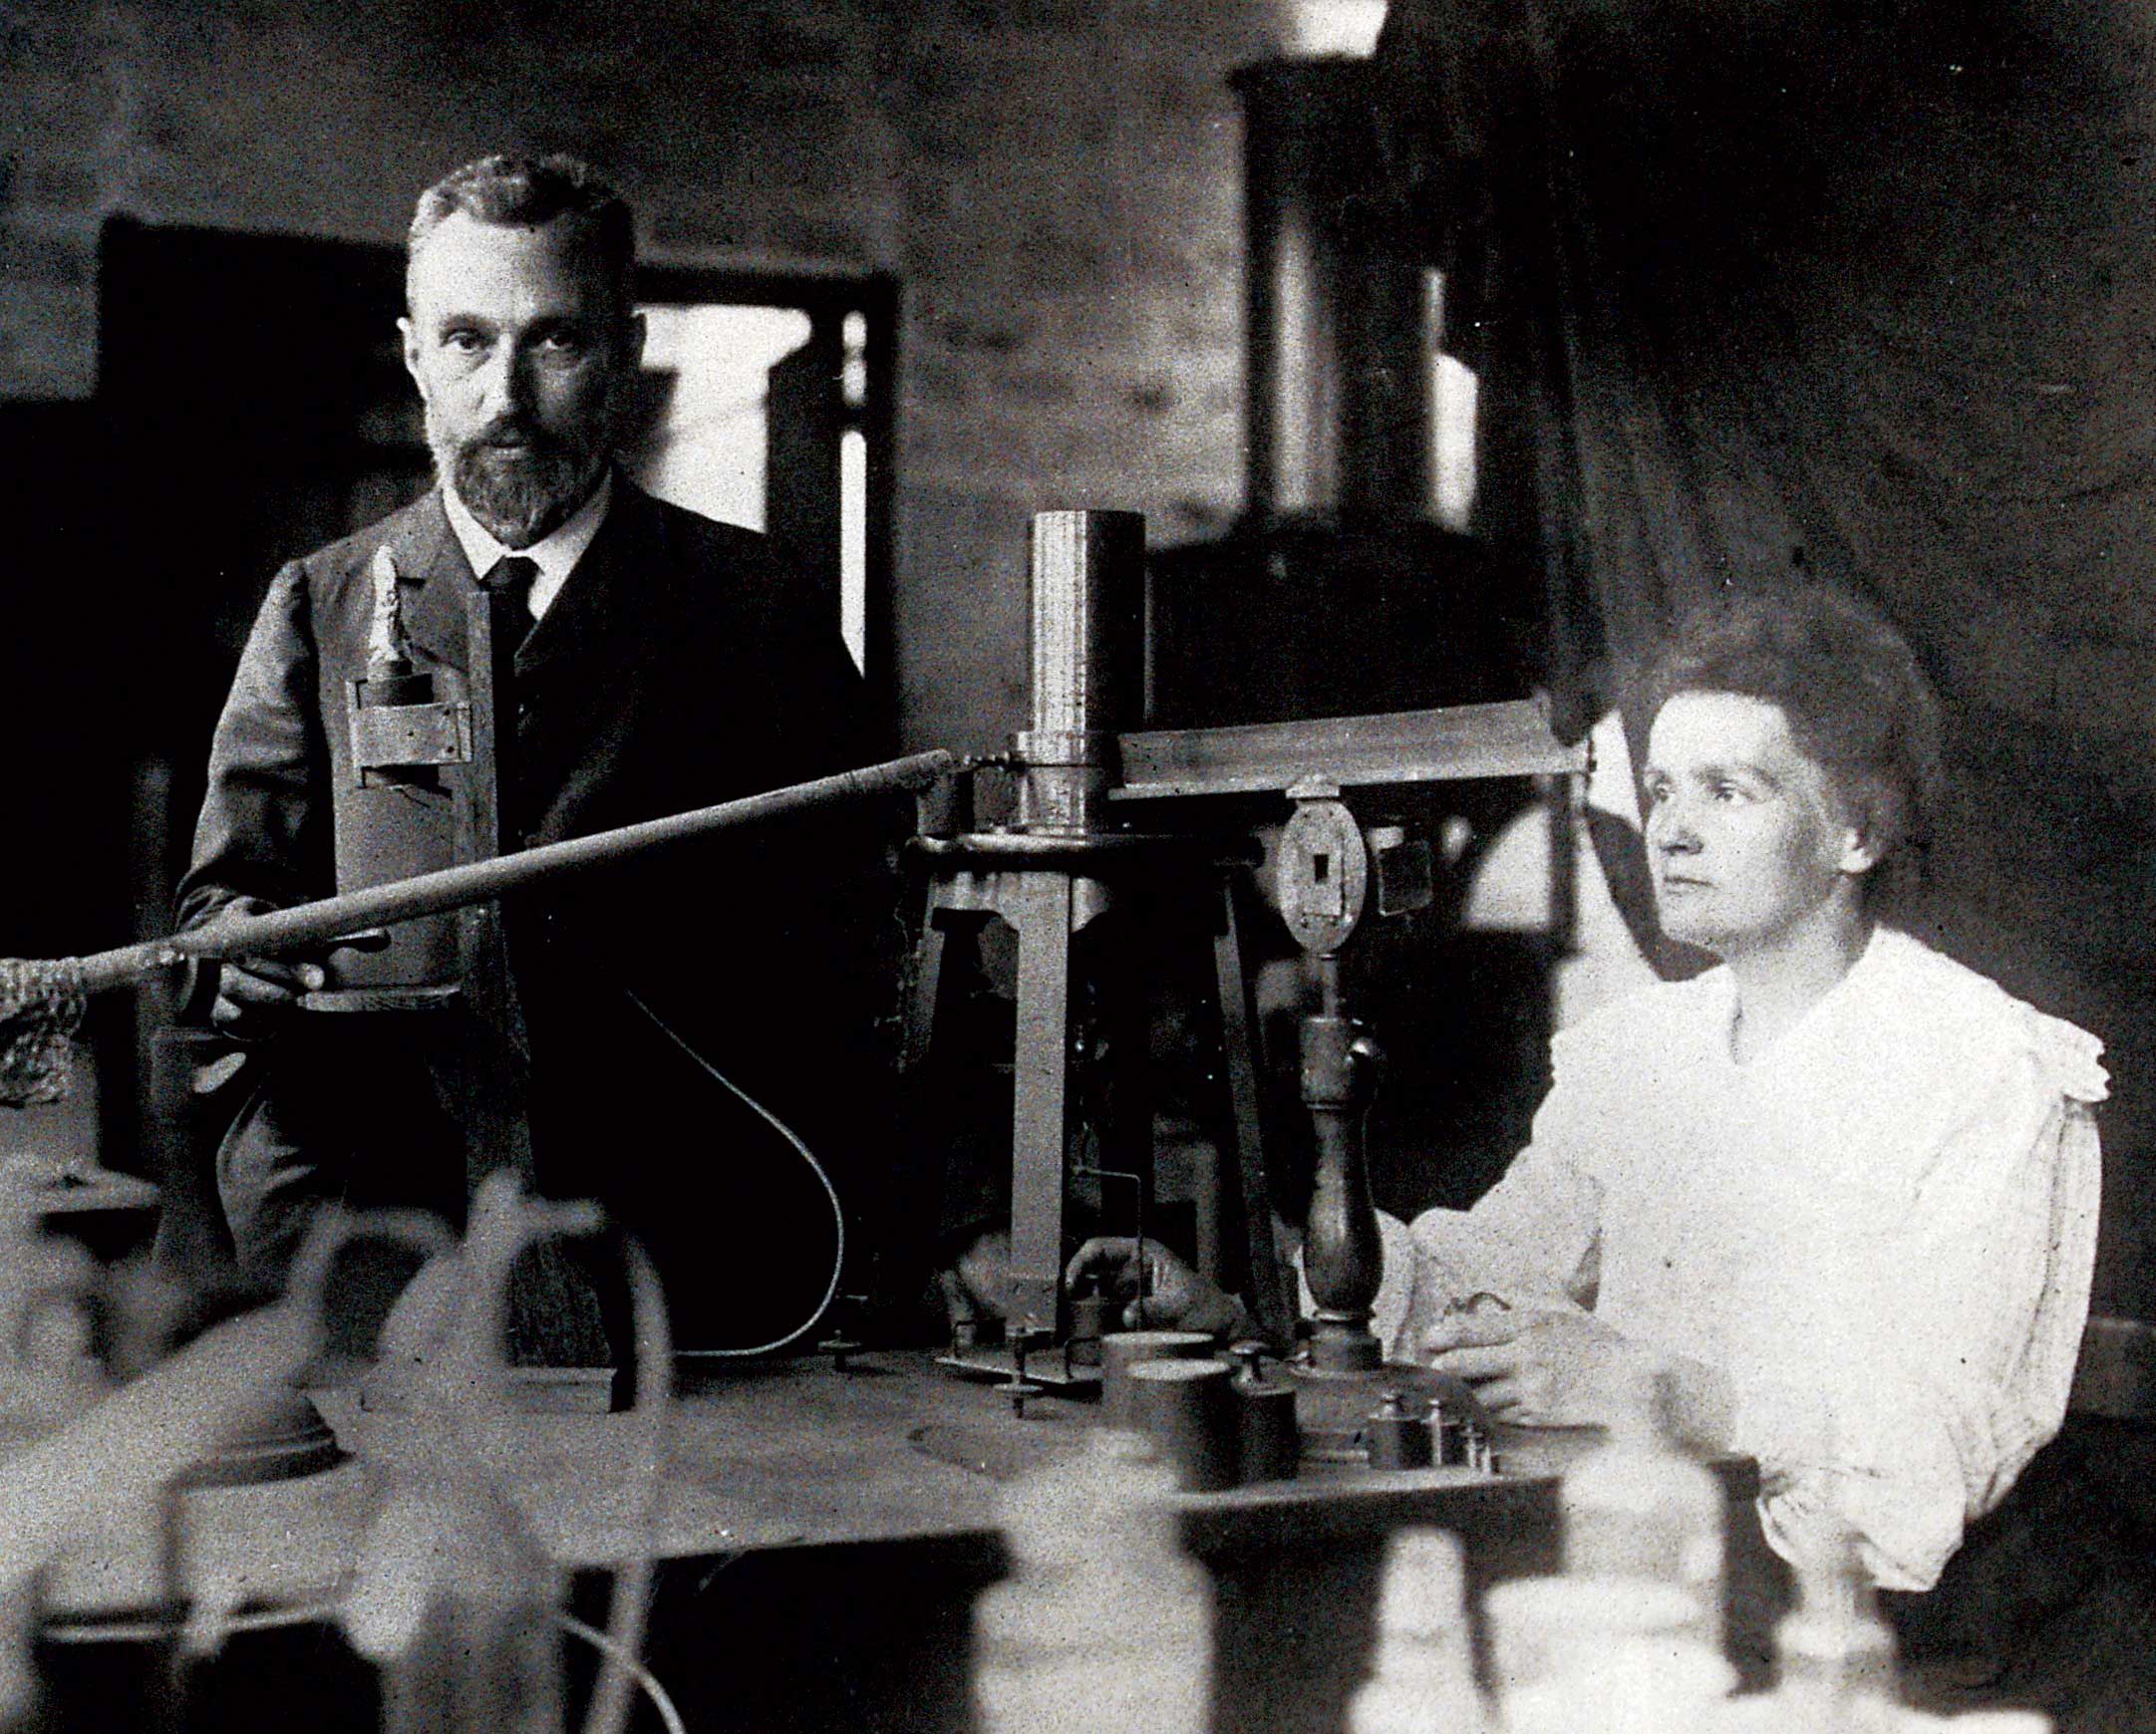 Pierre and Marie Curie in their lab